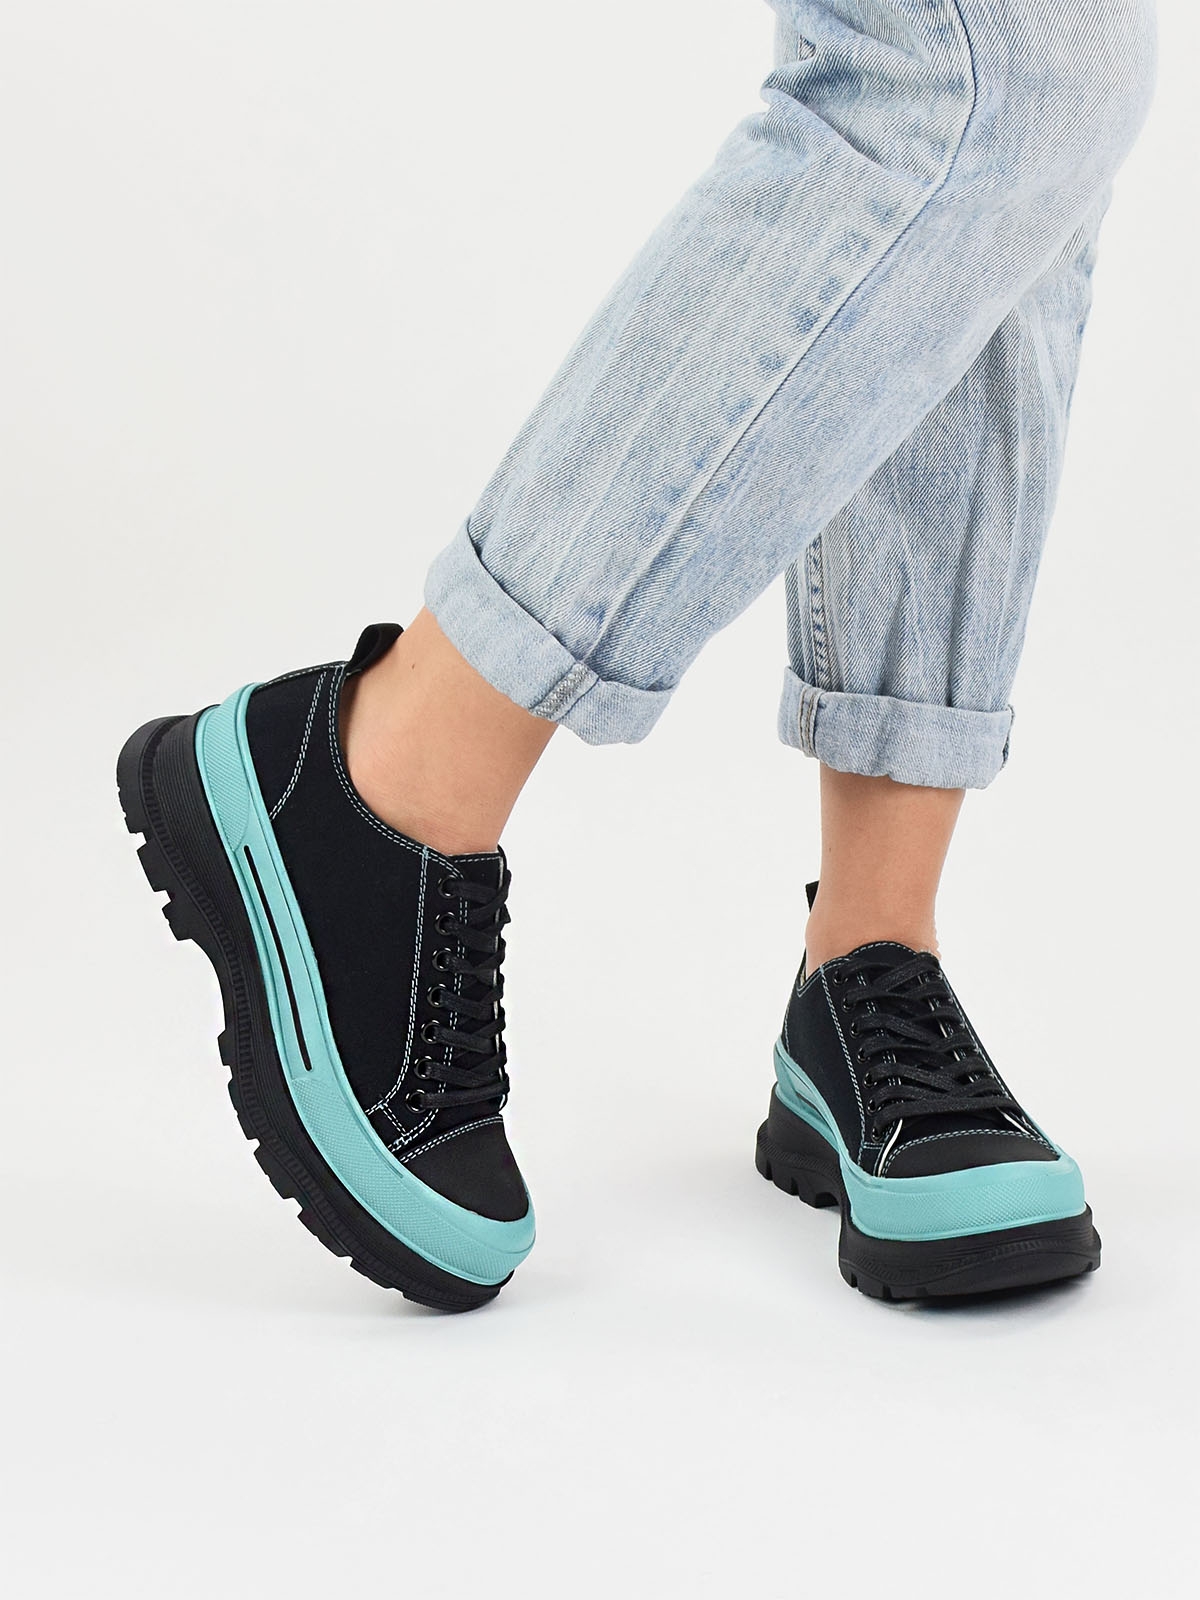 Chunky flat shoes with lace-up in black & mint